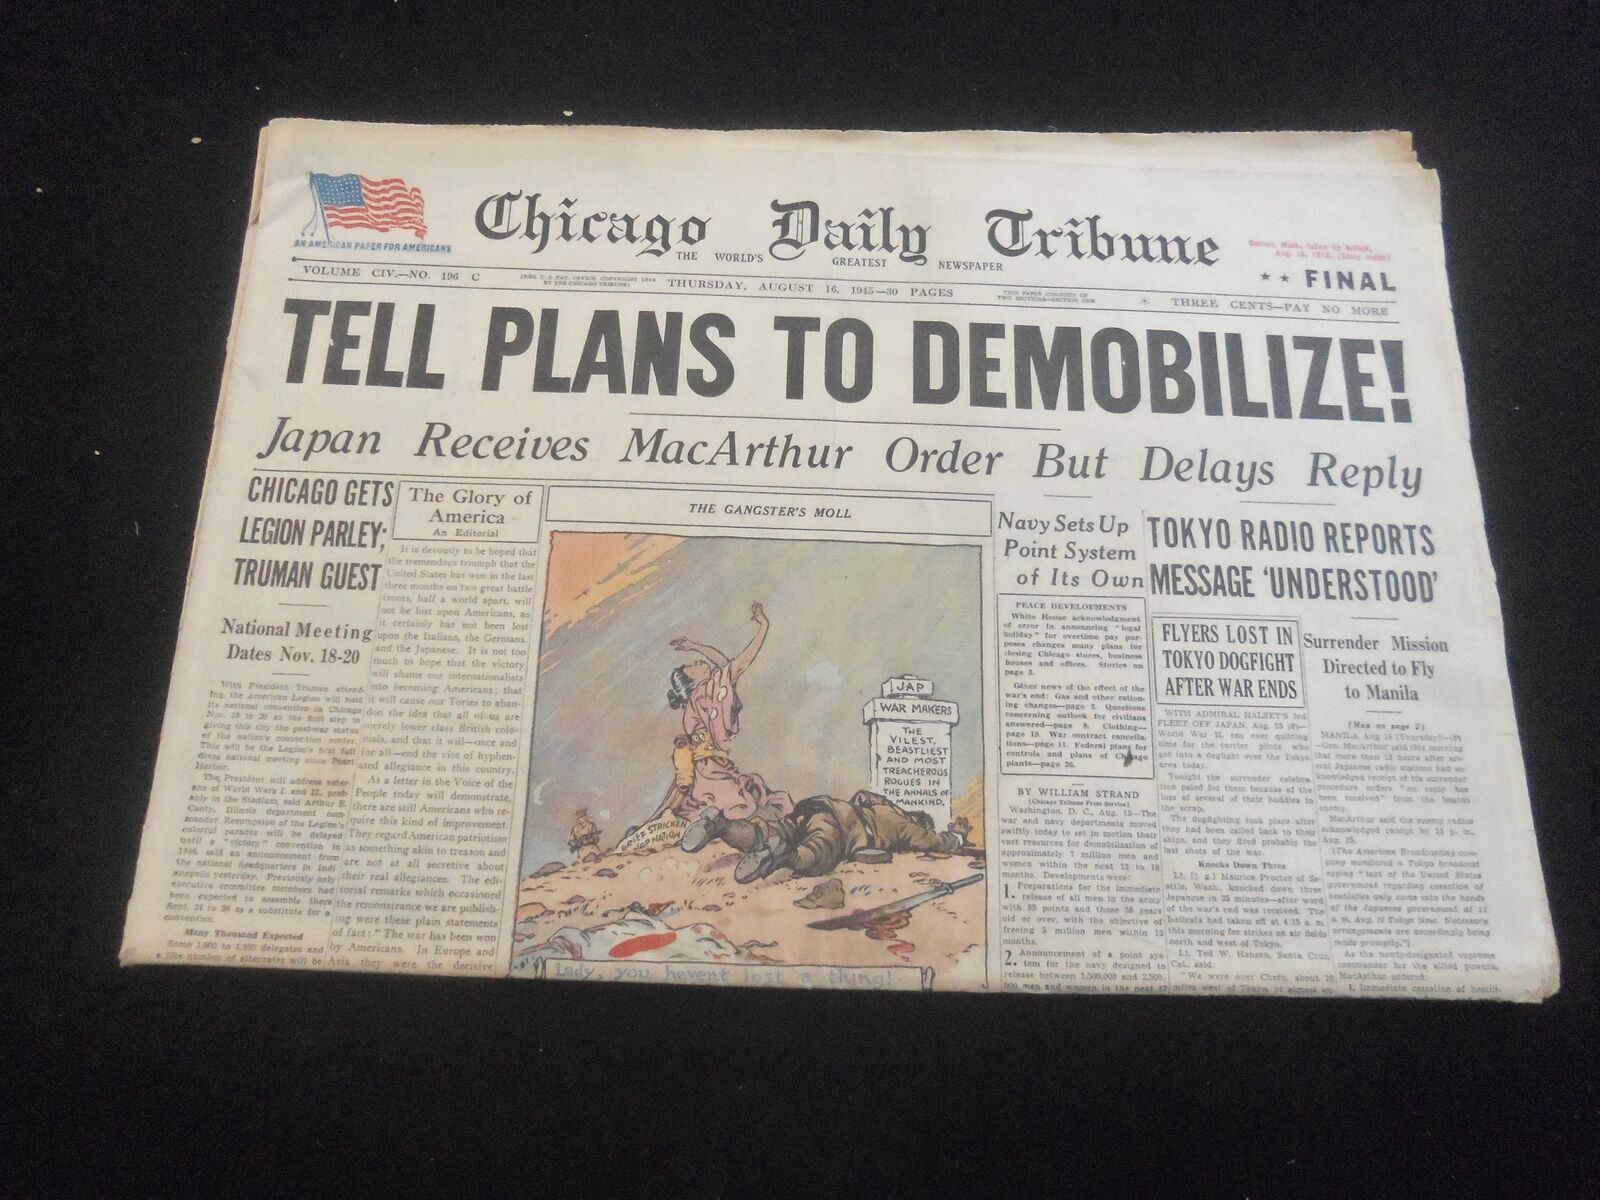 1945 AUG 16 CHICAGO DAILY TRIBUNE NEWSPAPER - TELL PLANS TO DEMOBILIZE- NP 5790